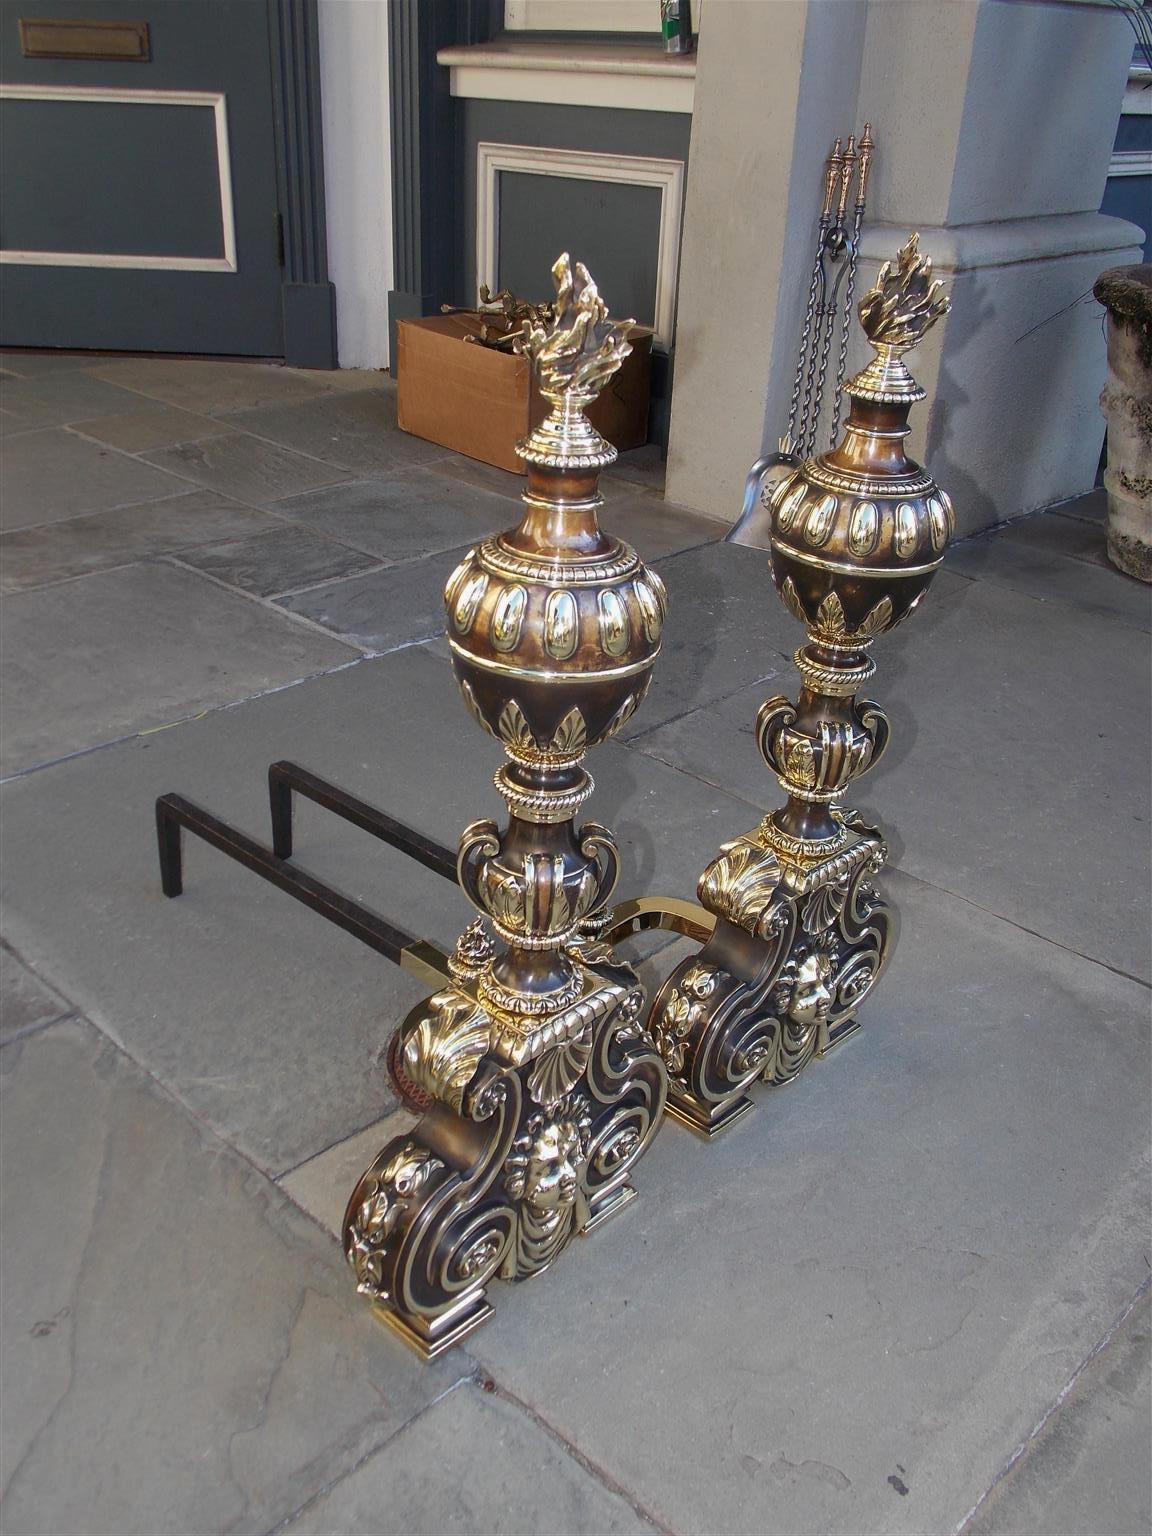 Pair of American bronze and brass ball top andirons with hand chased beading, bossing, foliage, and flanking flame finials. The andirons have a stylized centered scrolled foliage urn resting on a squared gadrooned plinth, matching flame finial log